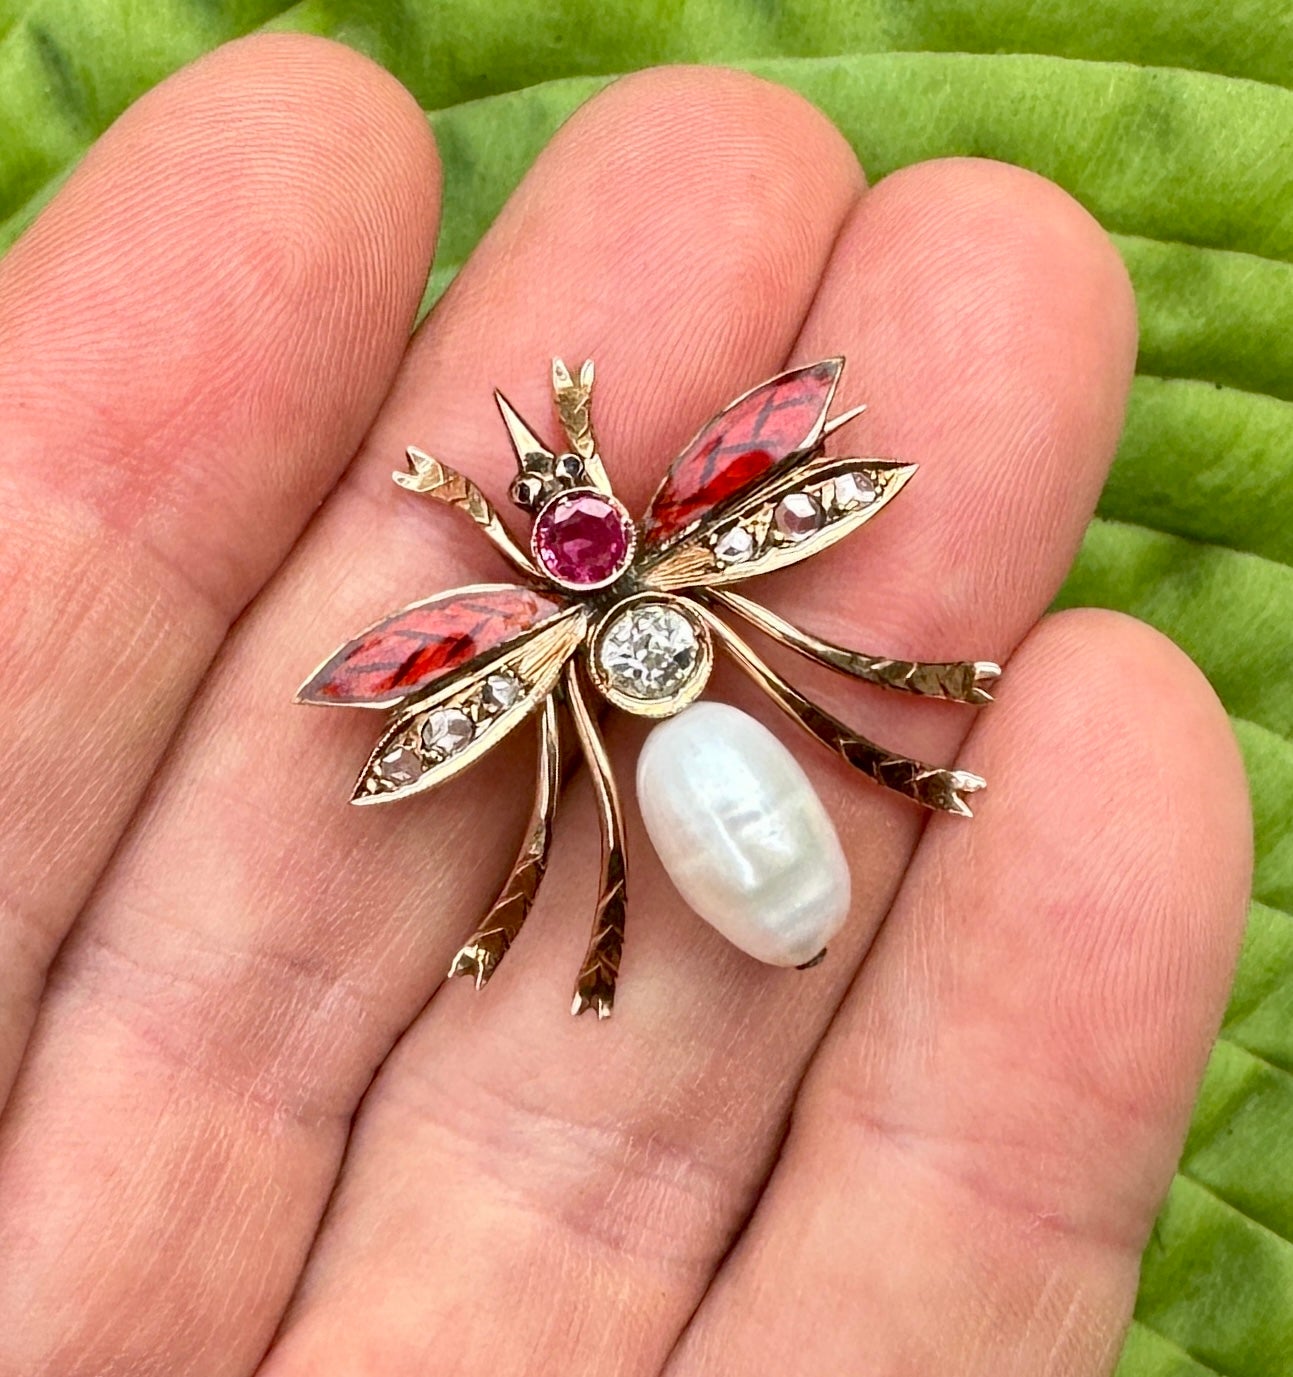 This is a stunning antique Art Nouveau - Art Deco Enamel, Rose Cut and Old MIne Cut Diamond, Ruby, Sapphire and Pearl Fly Bug Insect Brooch Pin in 10 Karat Gold.  The magnificent insect brooch has a central 1/2 Carat Old Mine Cut Diamond of great